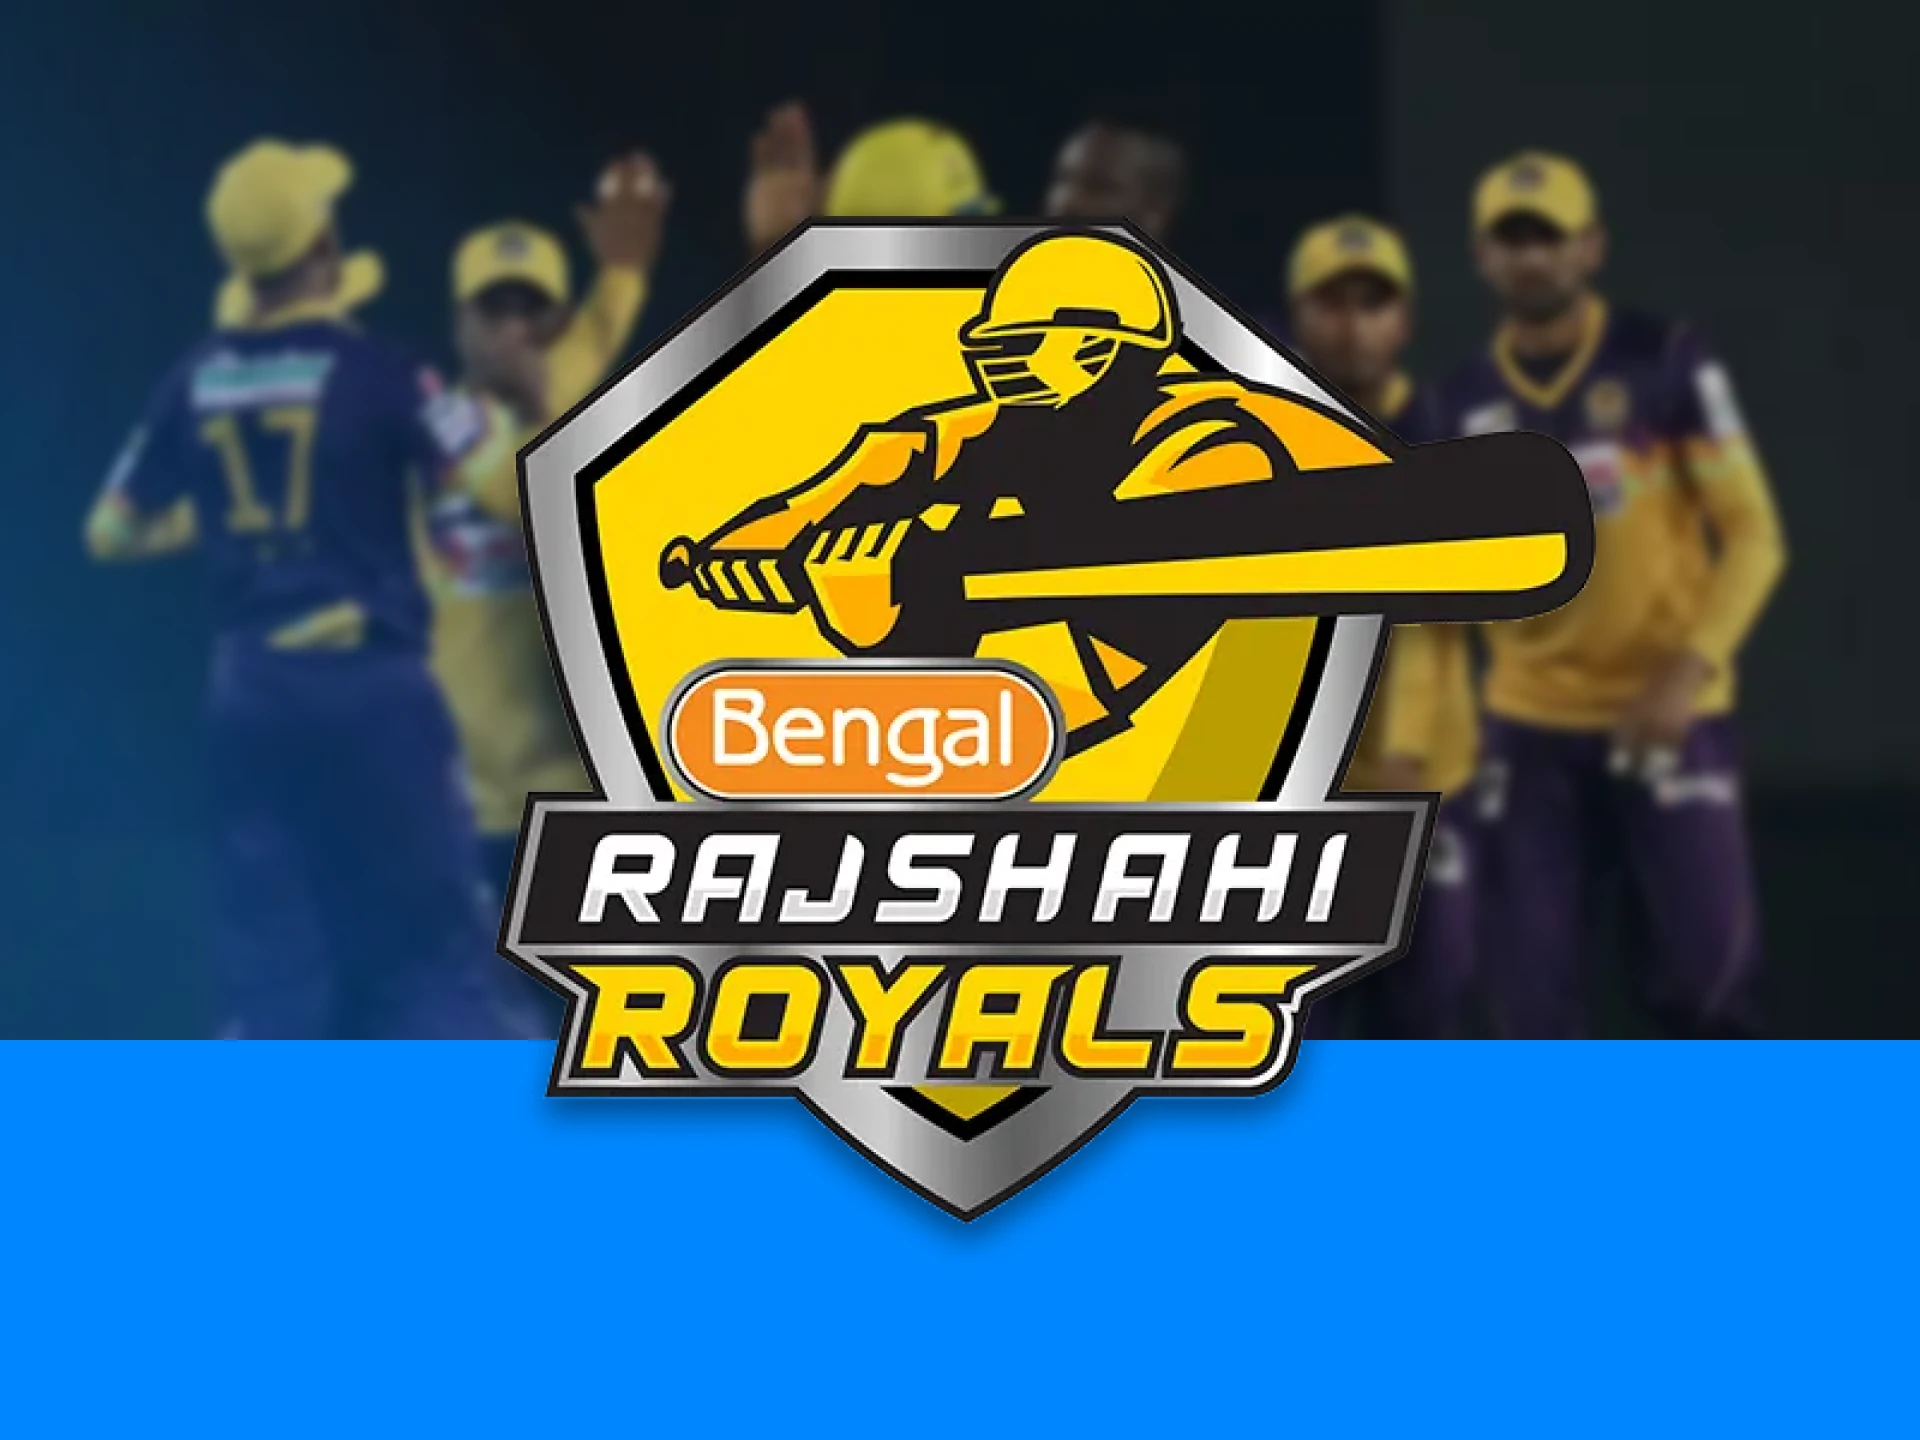 The Rajshahi Royals team has great players and a high reputation among cricket fans.